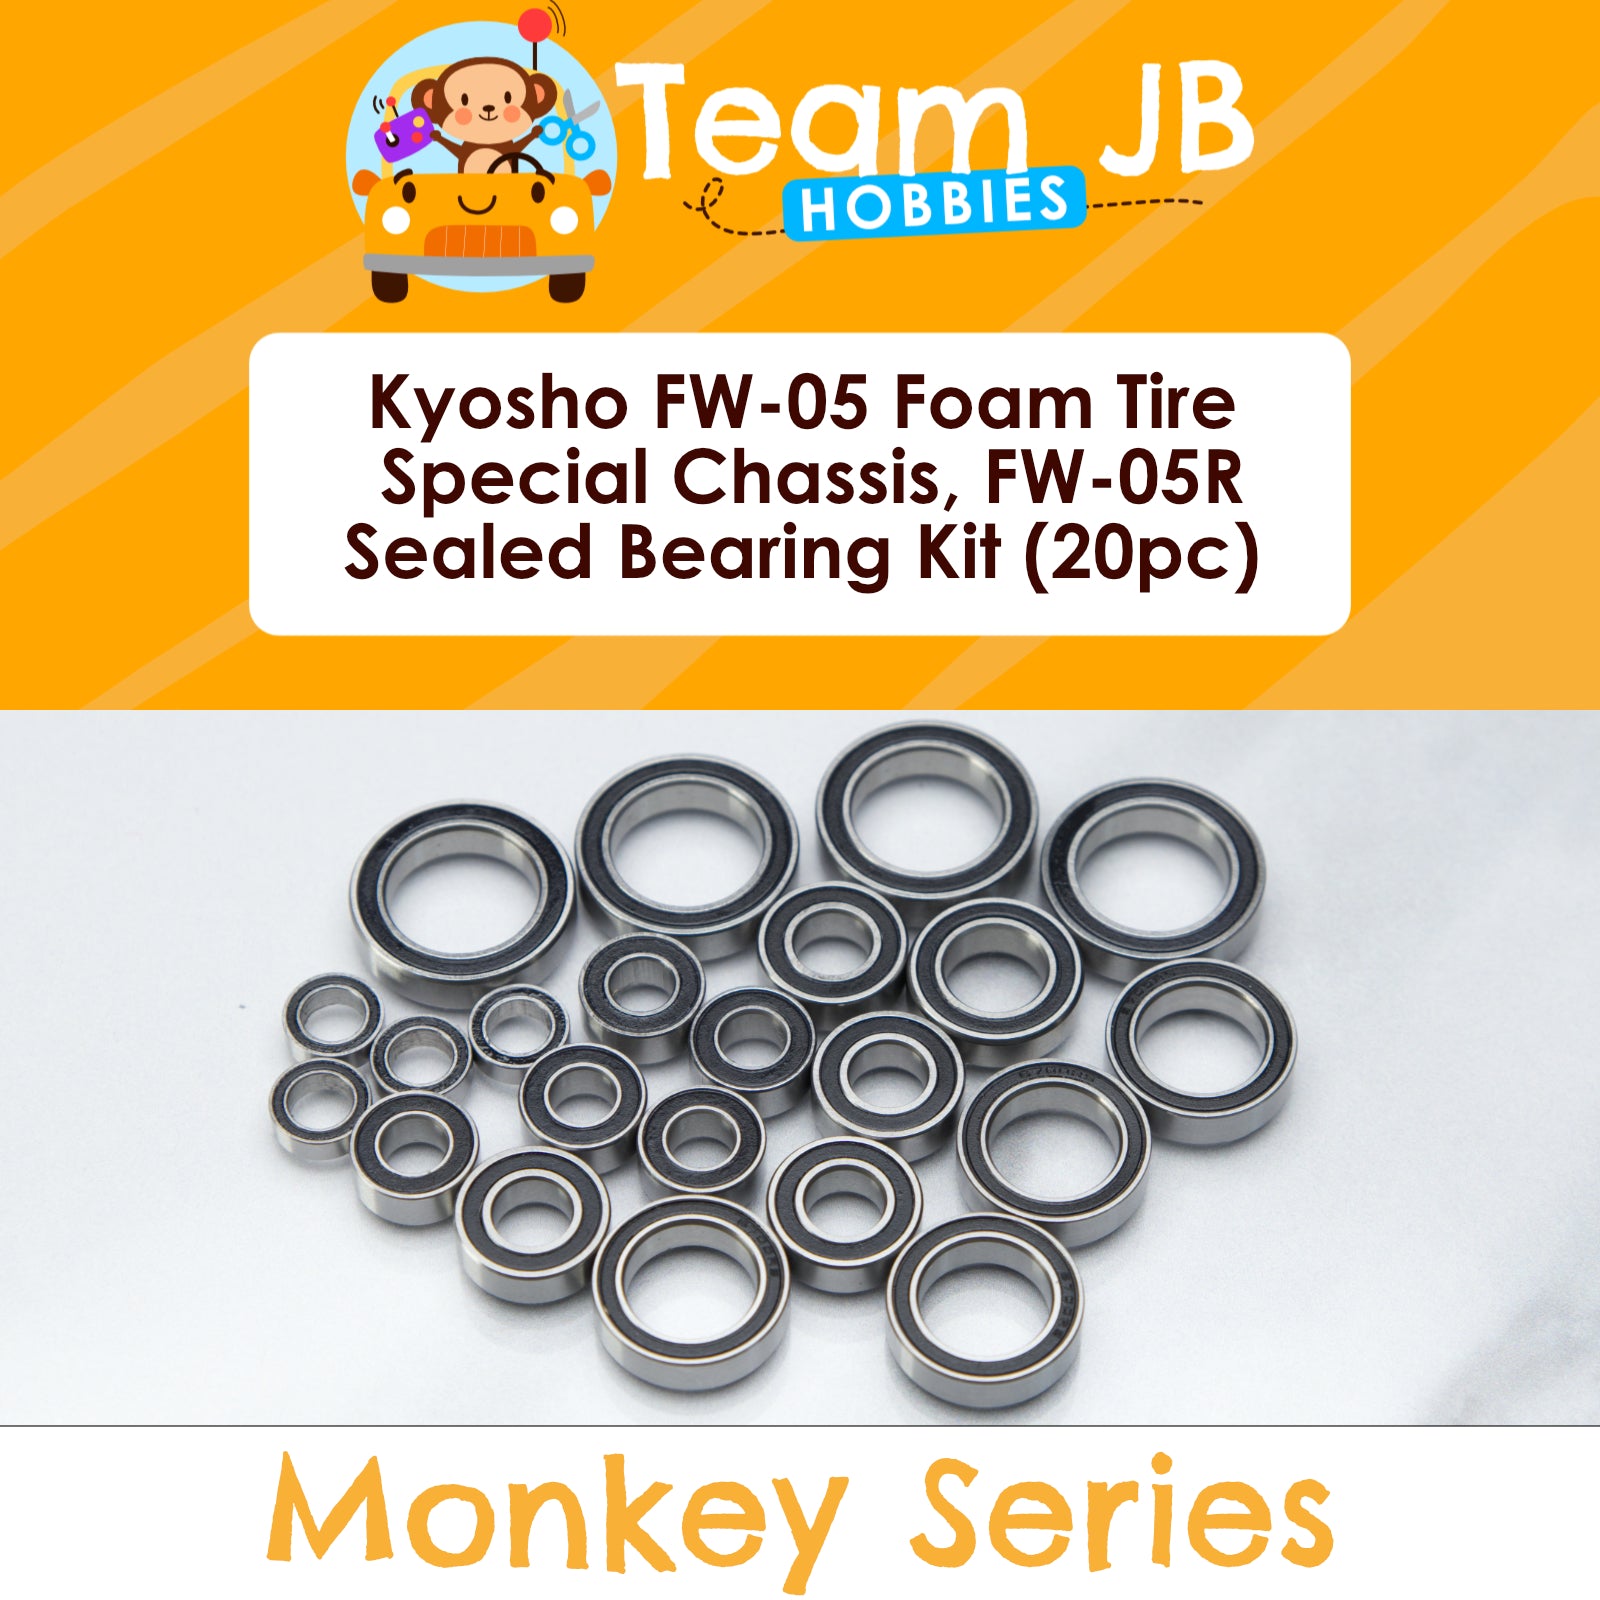 Kyosho FW-05 Foam Tire Special Chassis, FW-05R - Sealed Bearing Kit